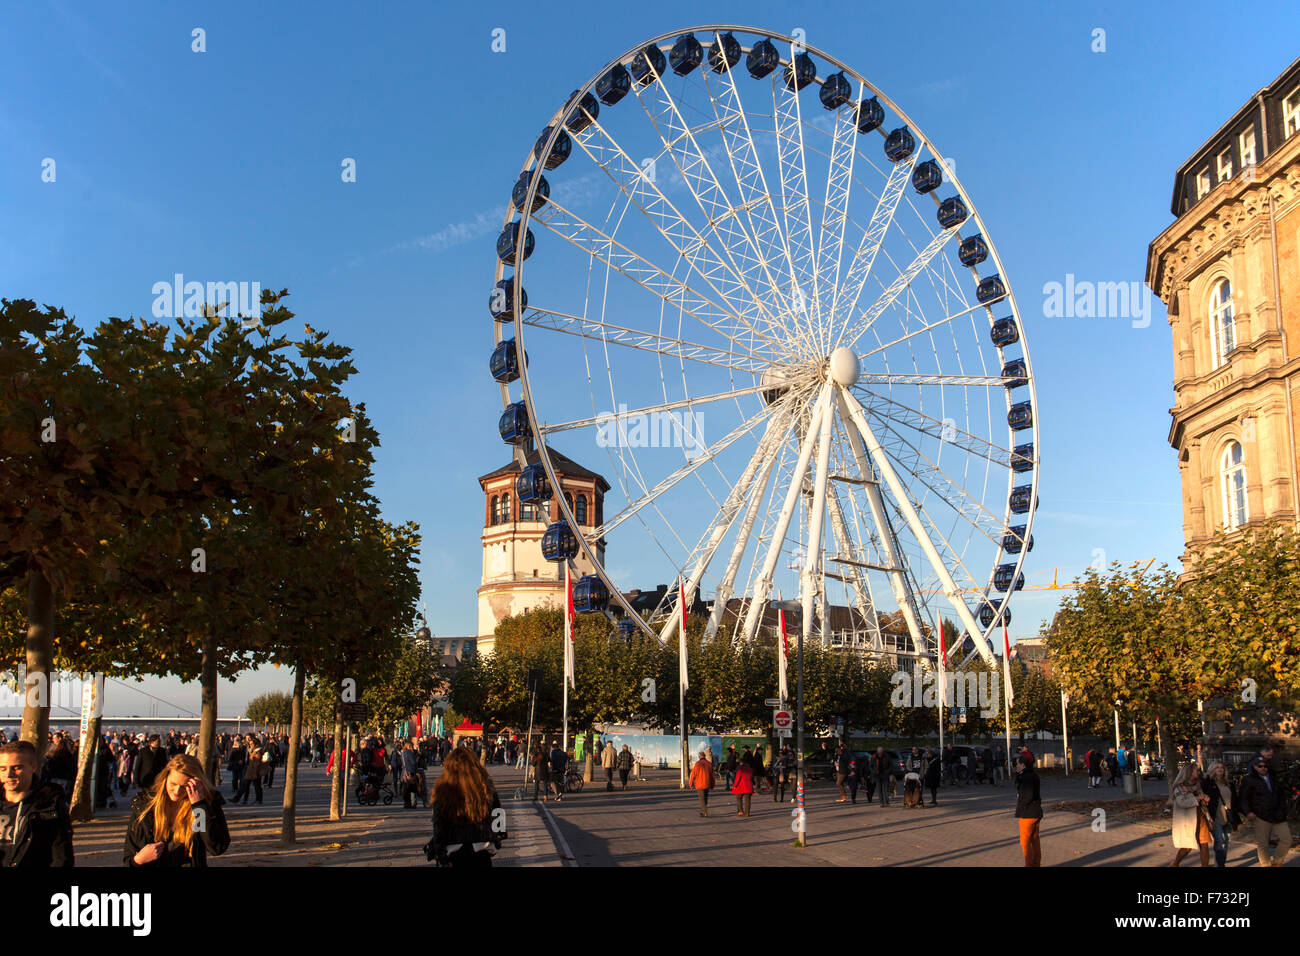 Ferris wheel in the old town of Duesseldorf Stock Photo